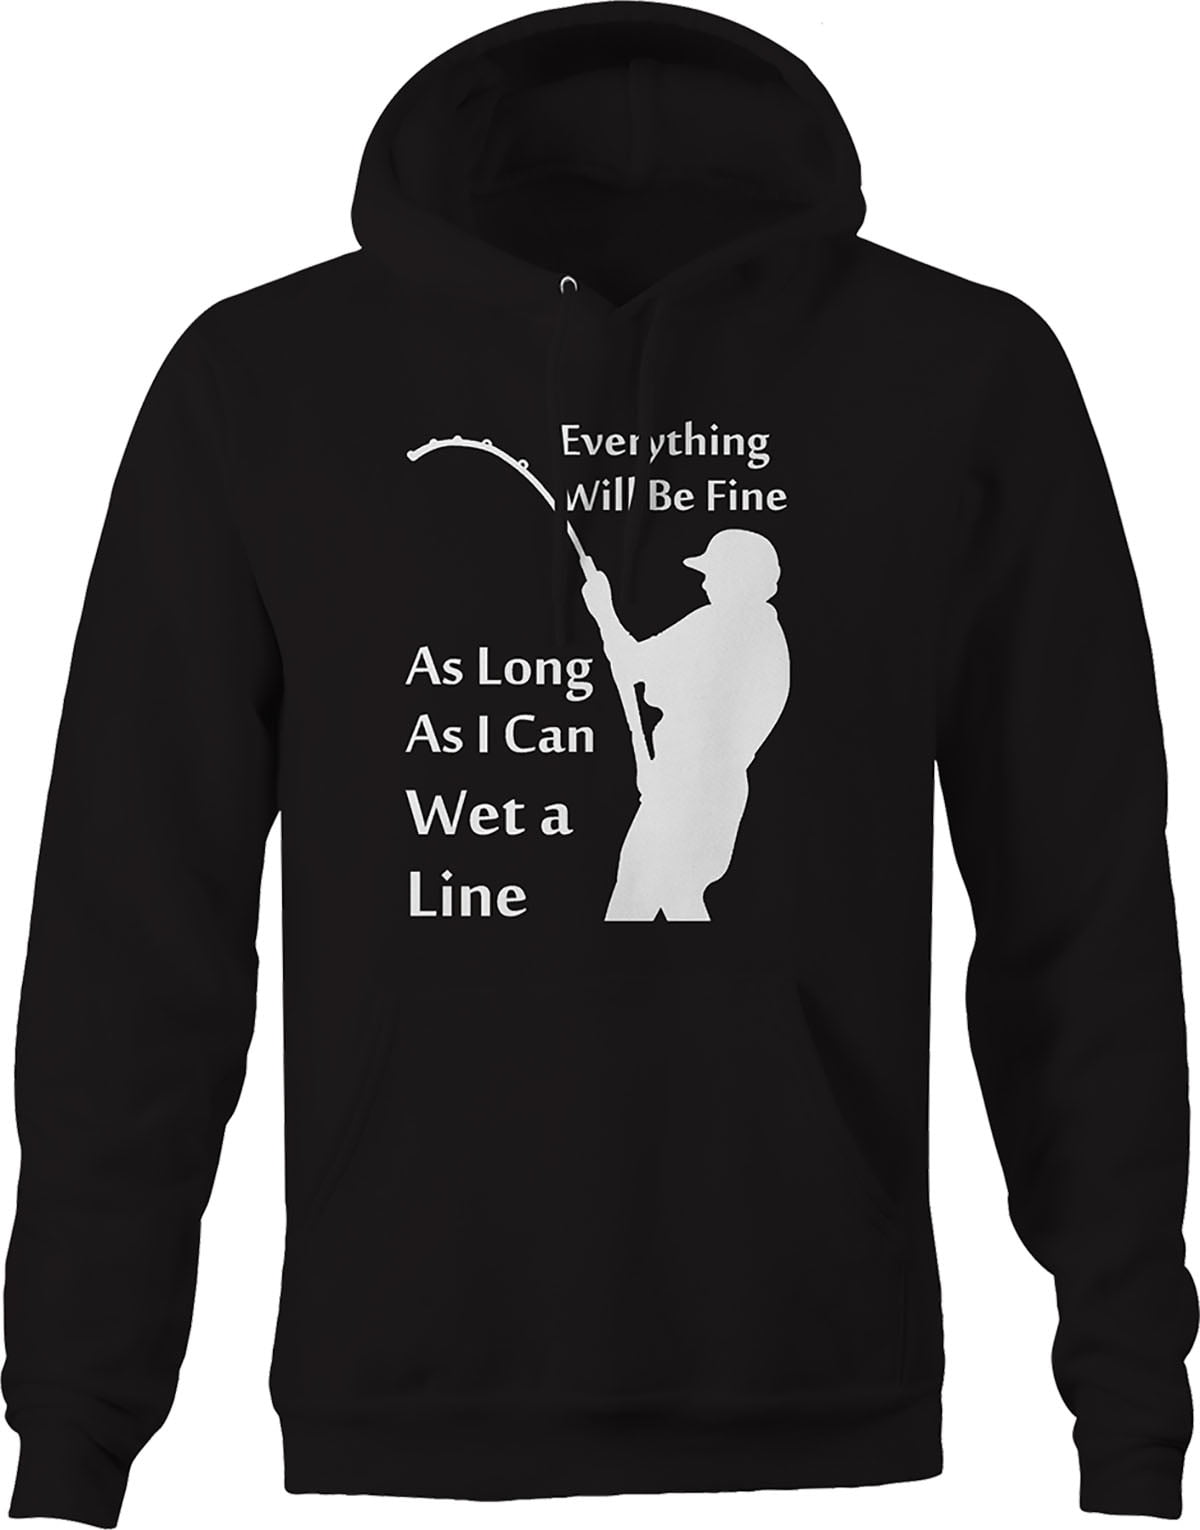 Everything Will Be Fine Wet a Line Fly Fishing Graphic Hoodies